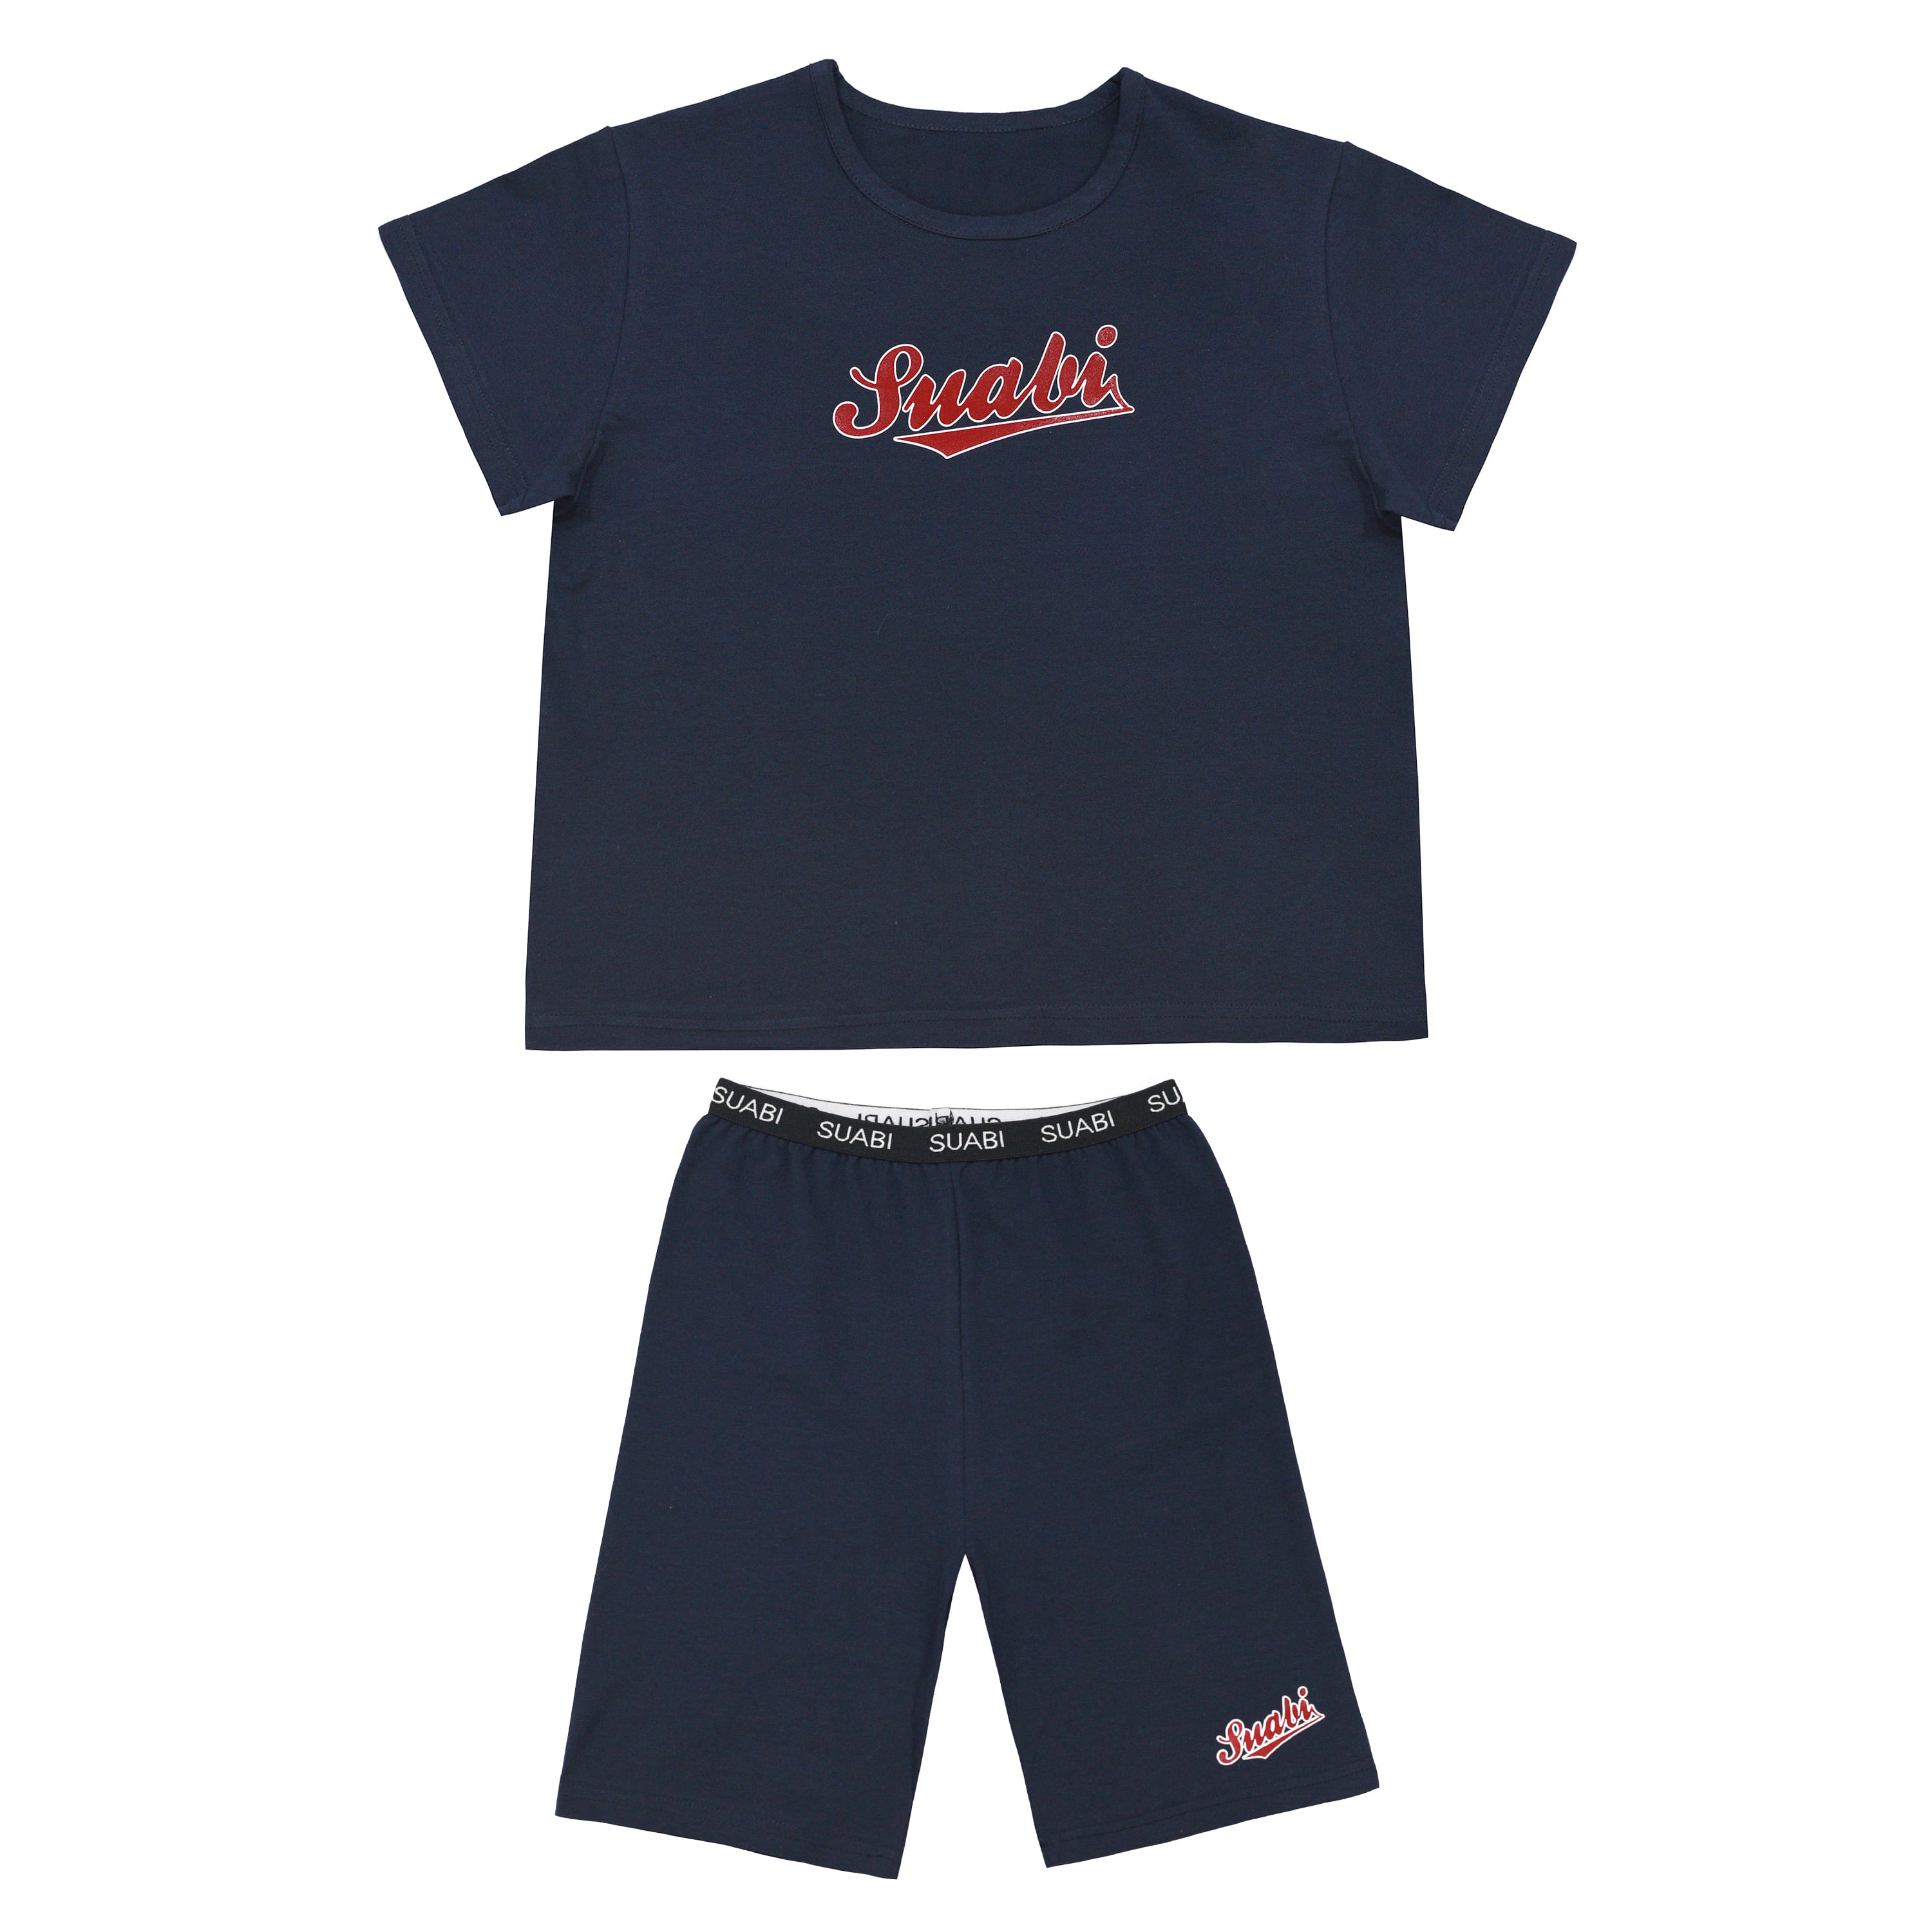 [Cotton]Short-sleeves SET : All Navy